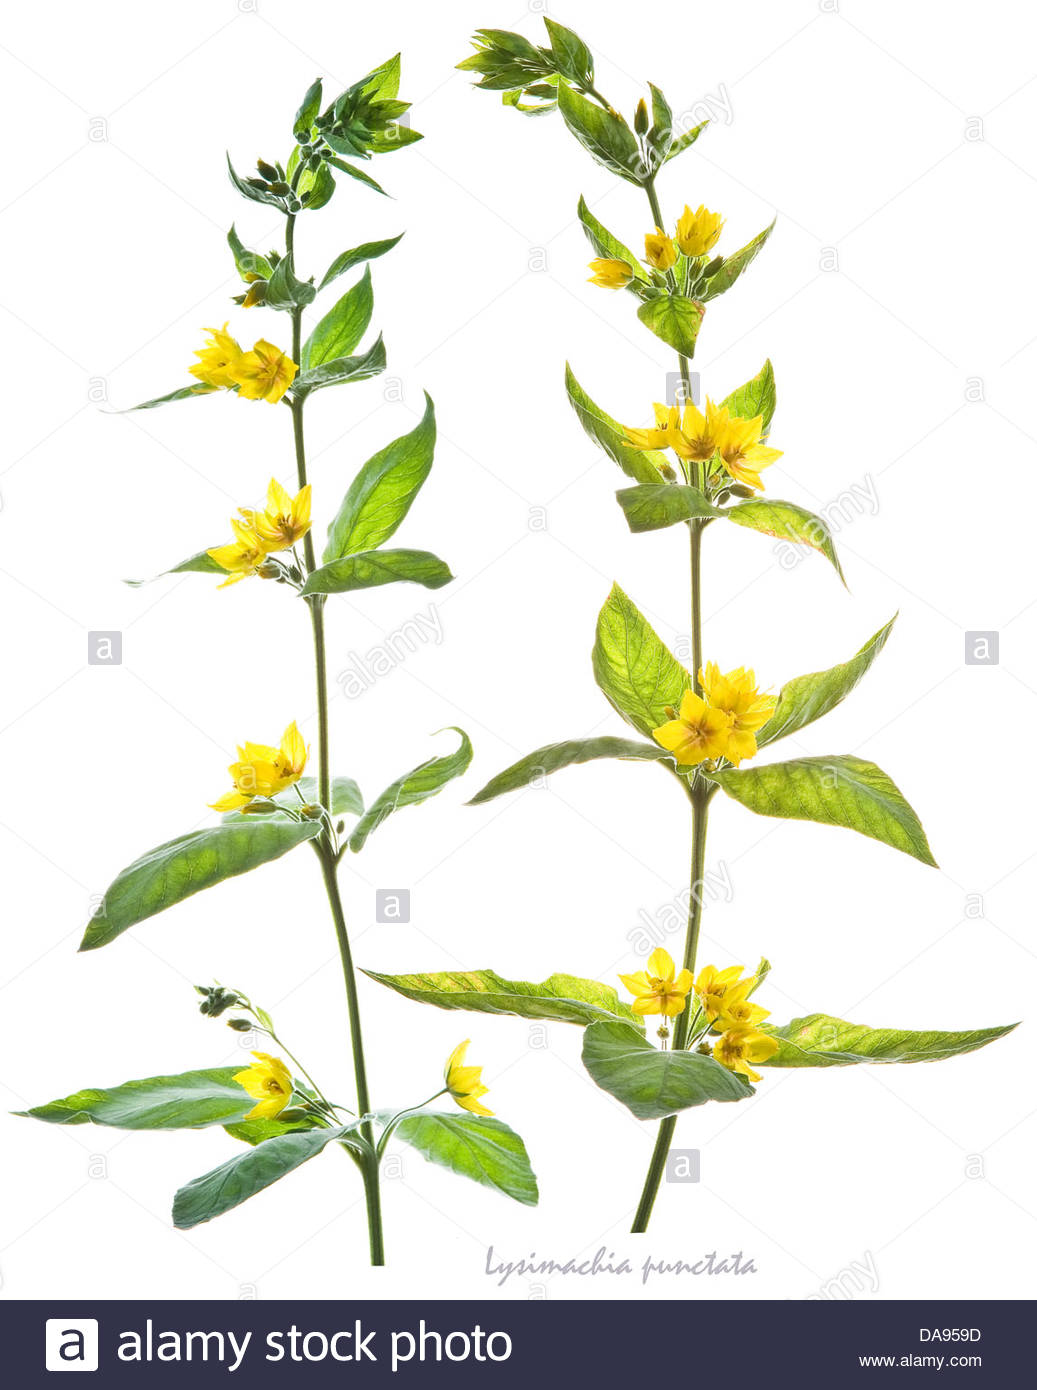 Spotted Loosestrife (lysimachia Punctata) Flowers And Leaves On.